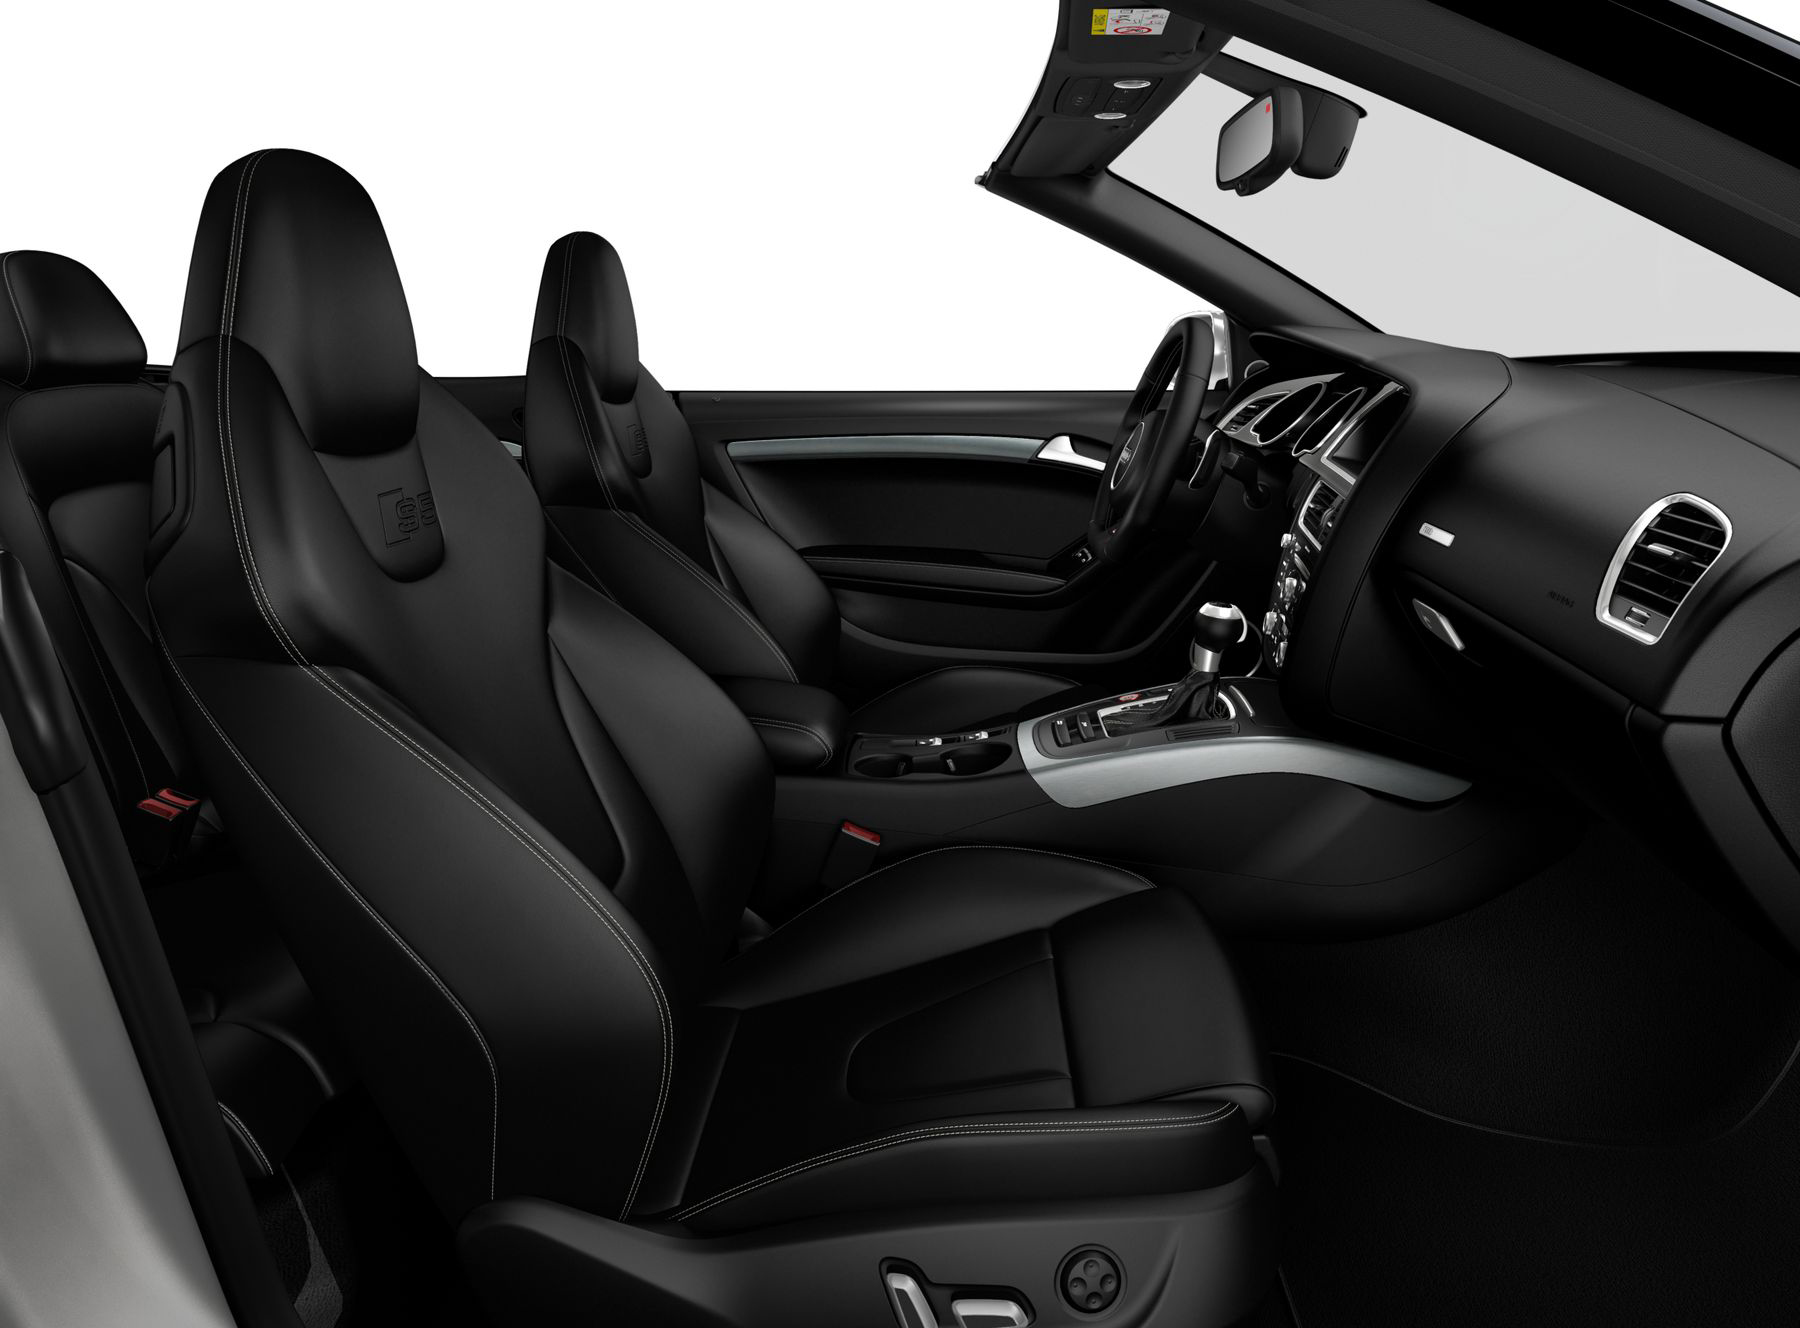 Audi S5 Cabriolet interior front view